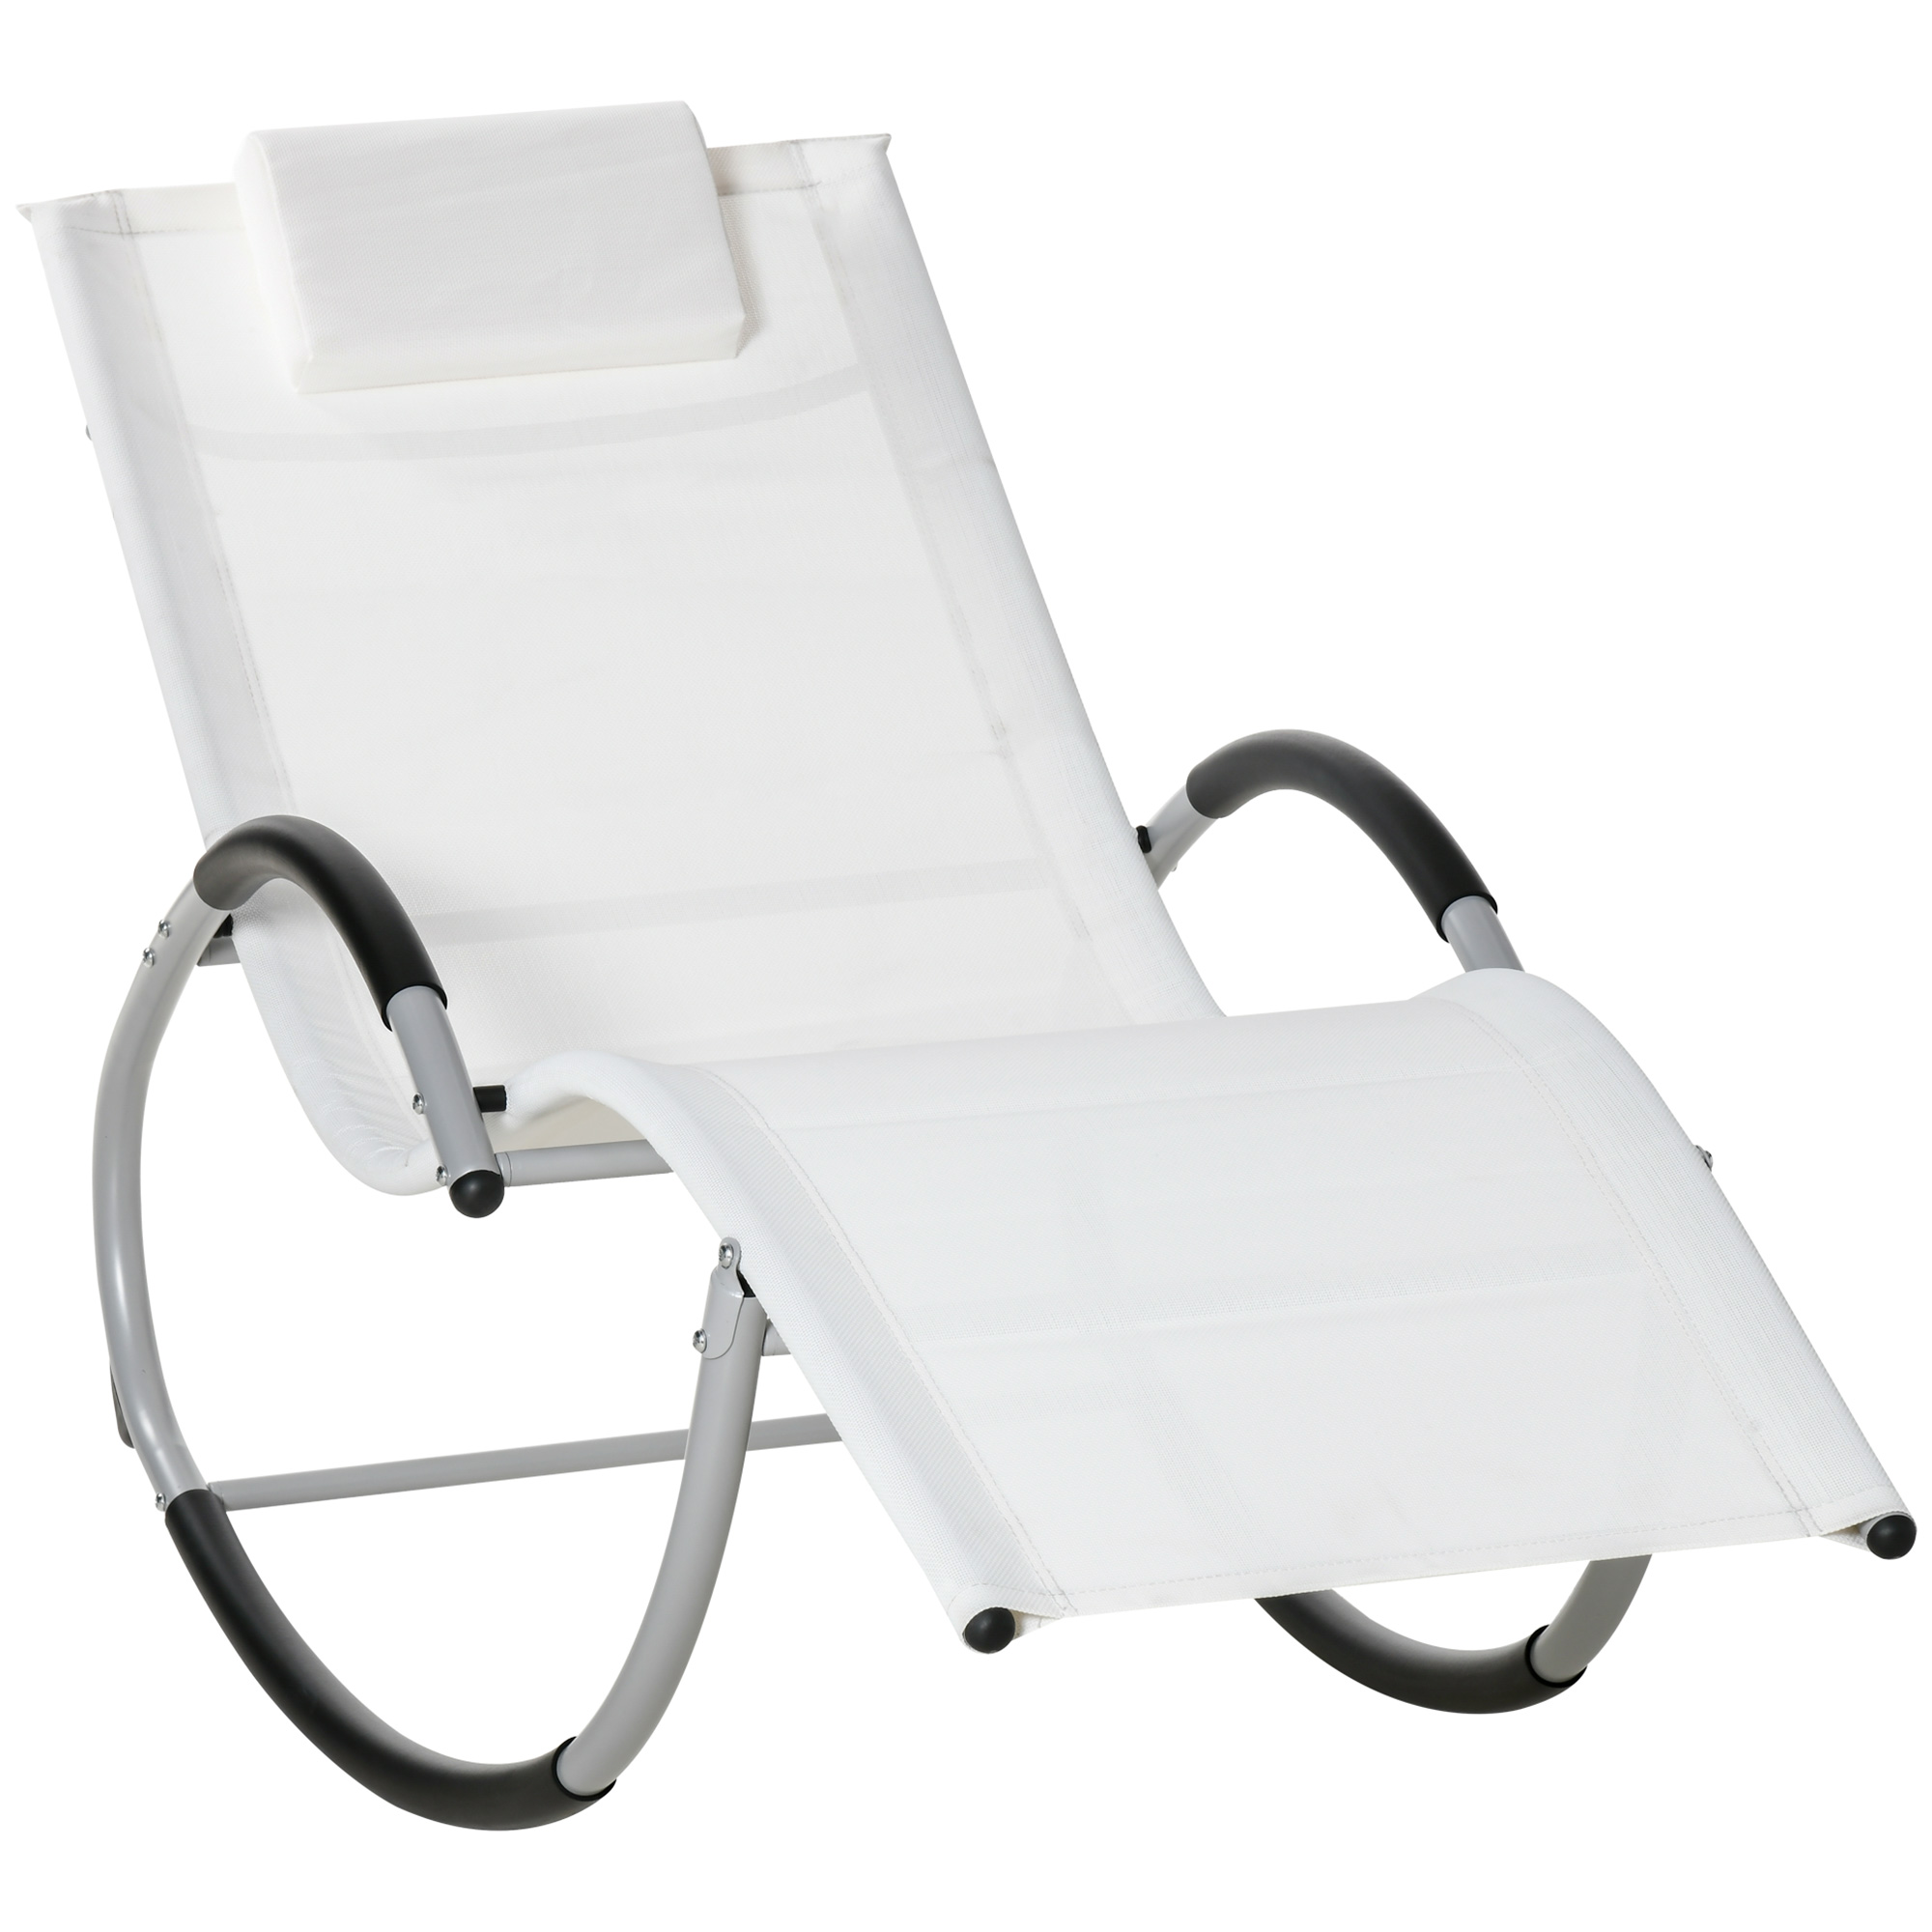 Outsunny Pool Lounge Outdoor Rocking Chair, Pillow, White - image 1 of 9